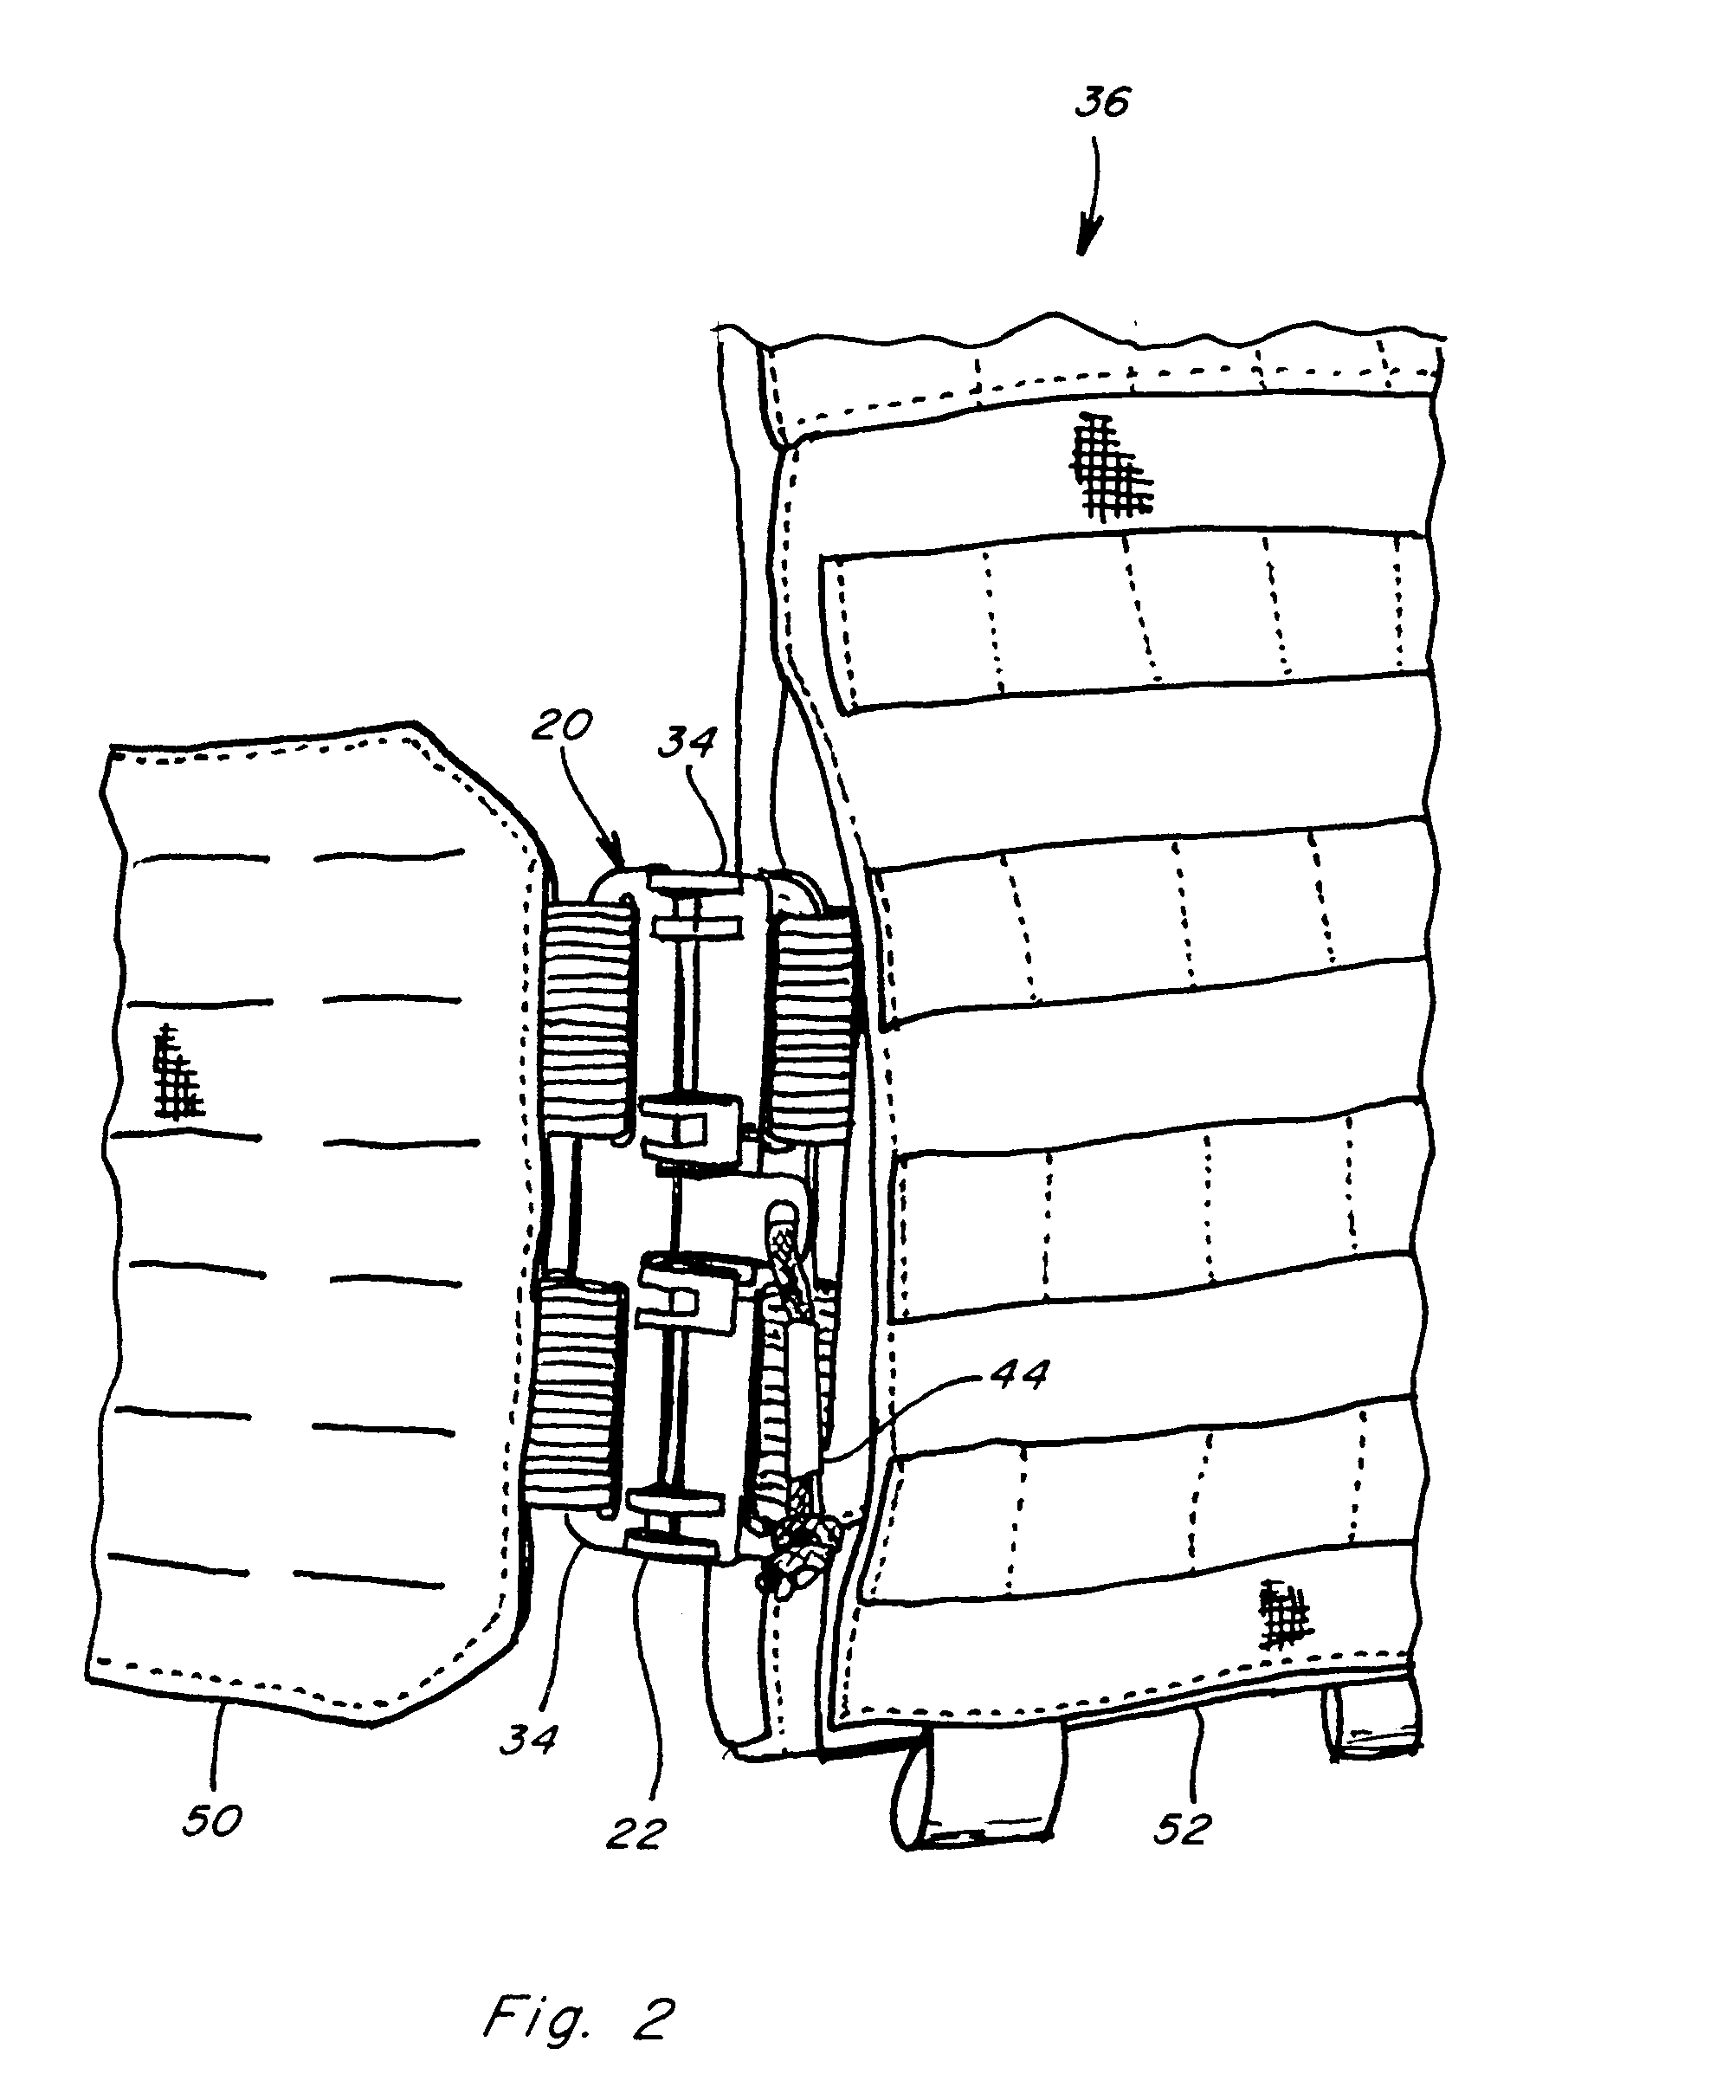 Garment assembly and release apparatus and method